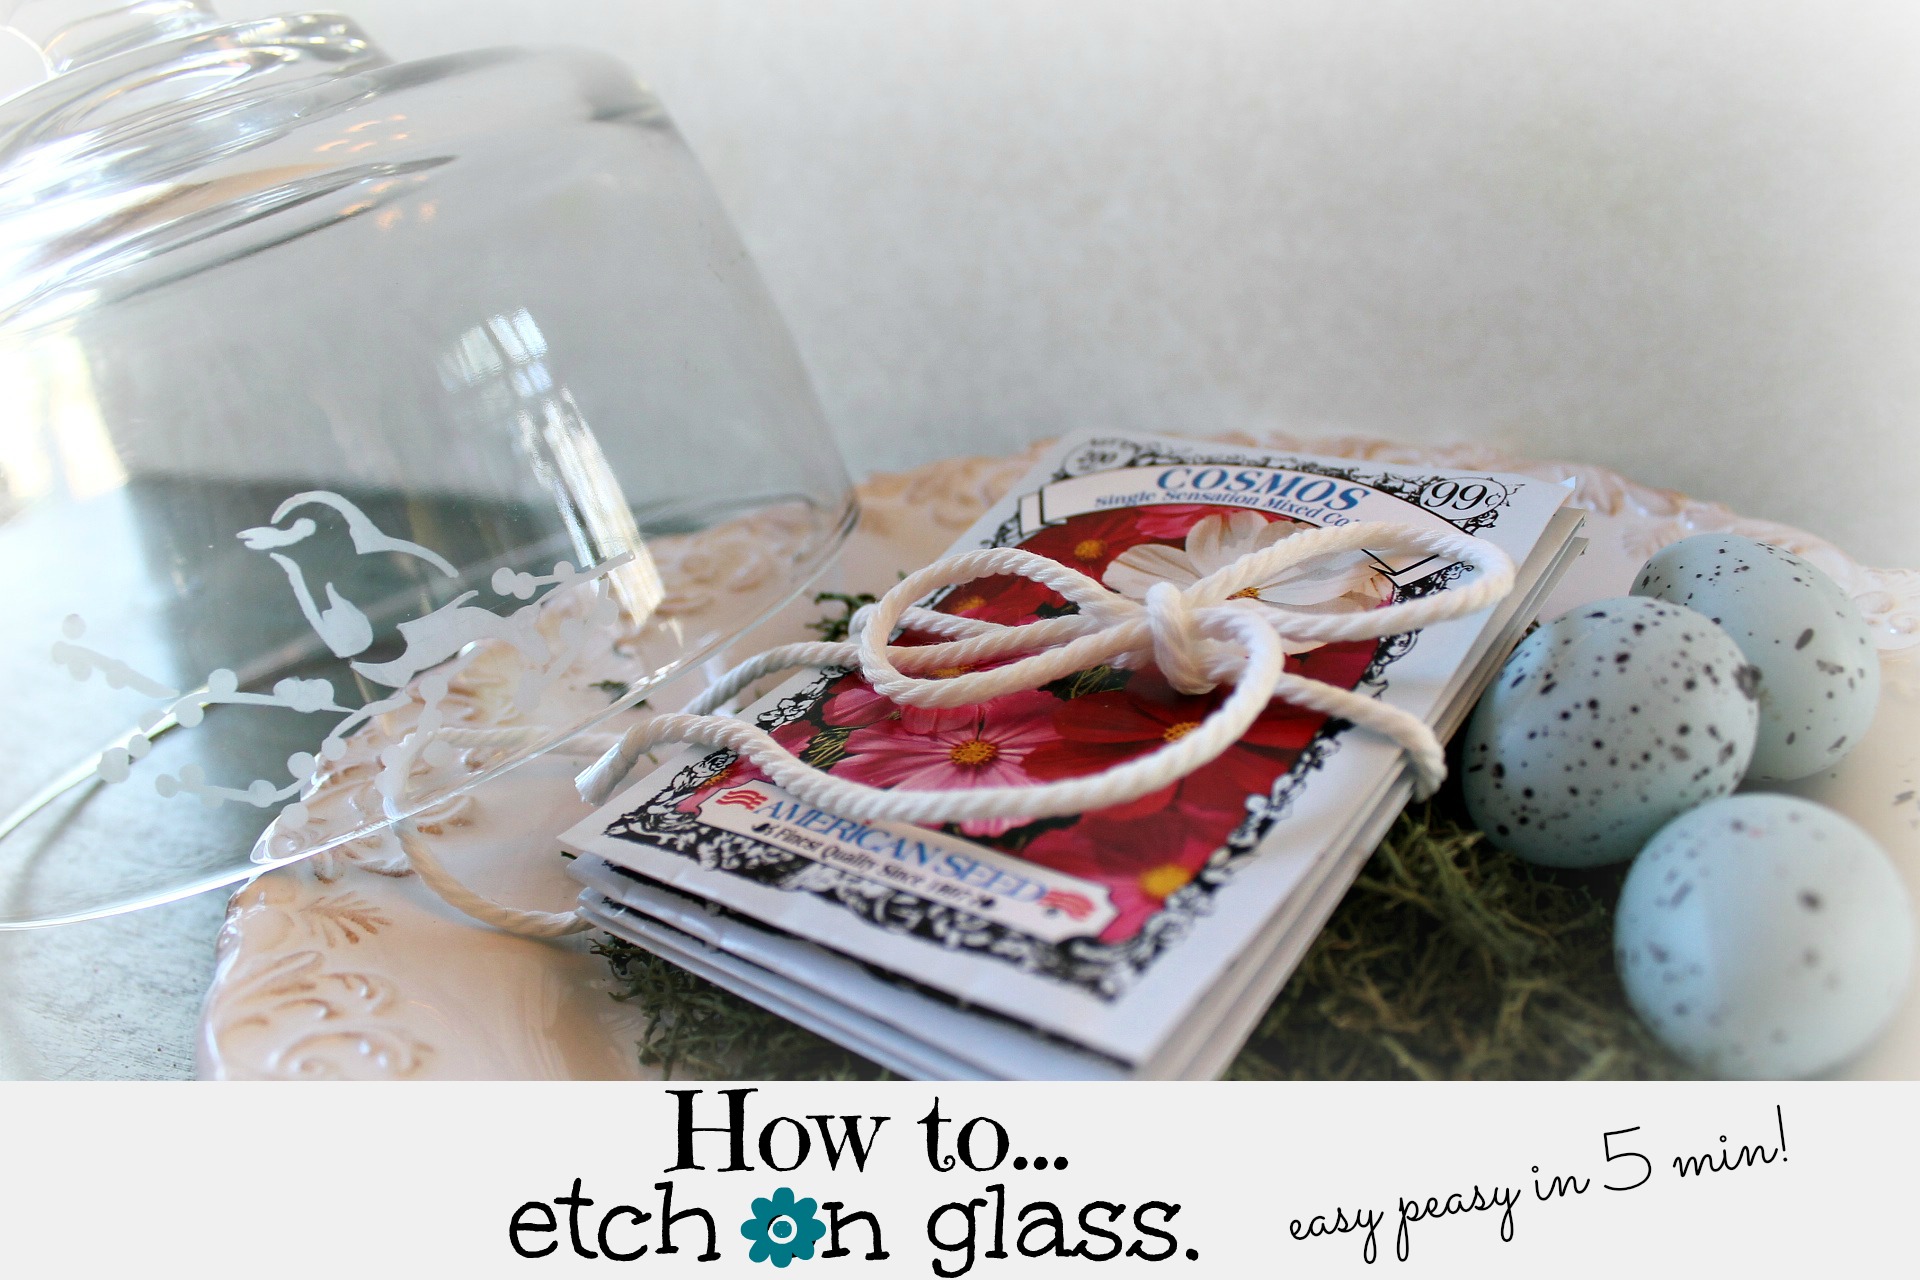 How to etch on glass